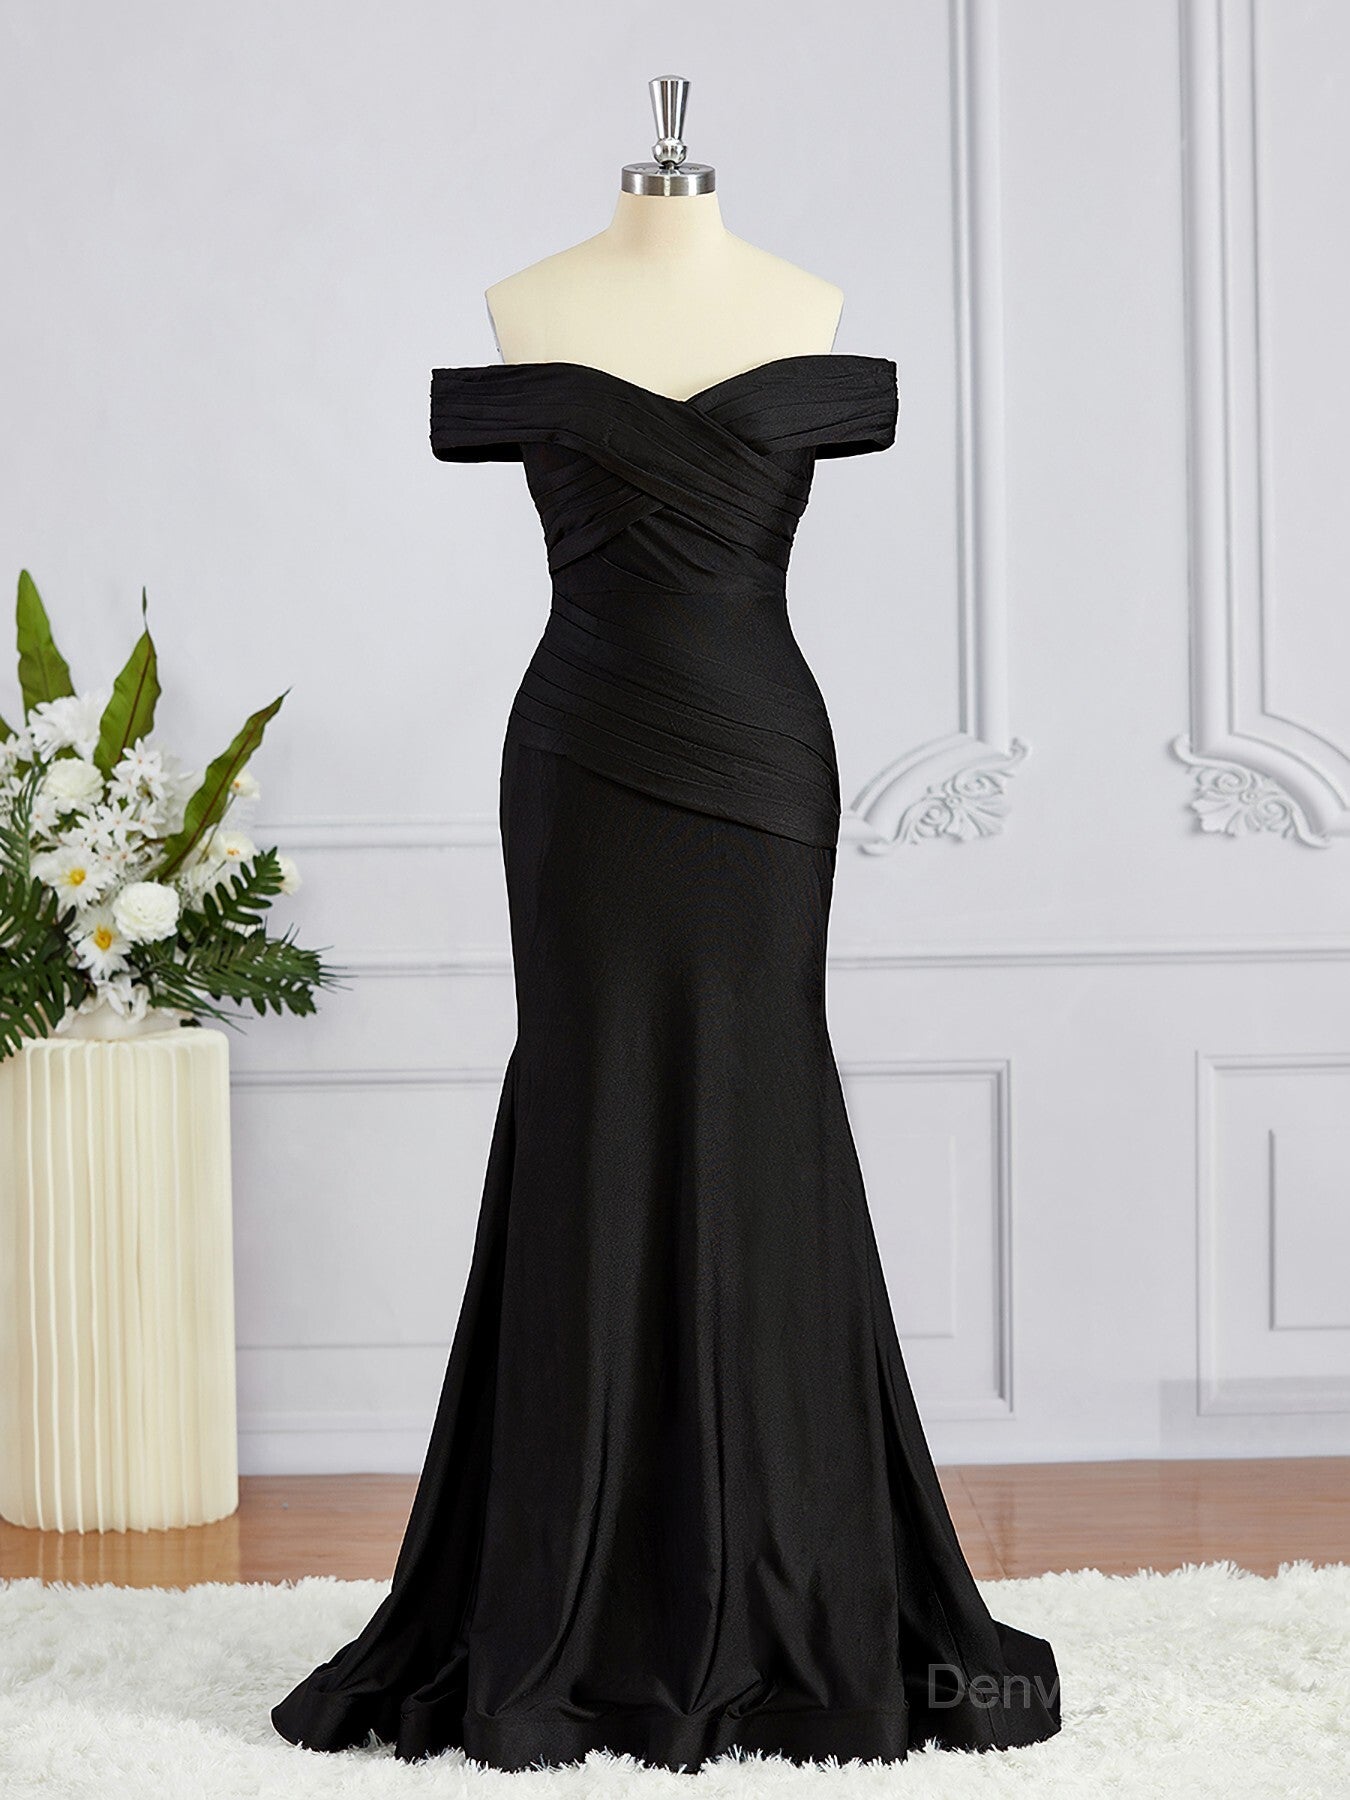 Sheath Off-the-Shoulder Sweep Train Jersey Bridesmaid Dresses